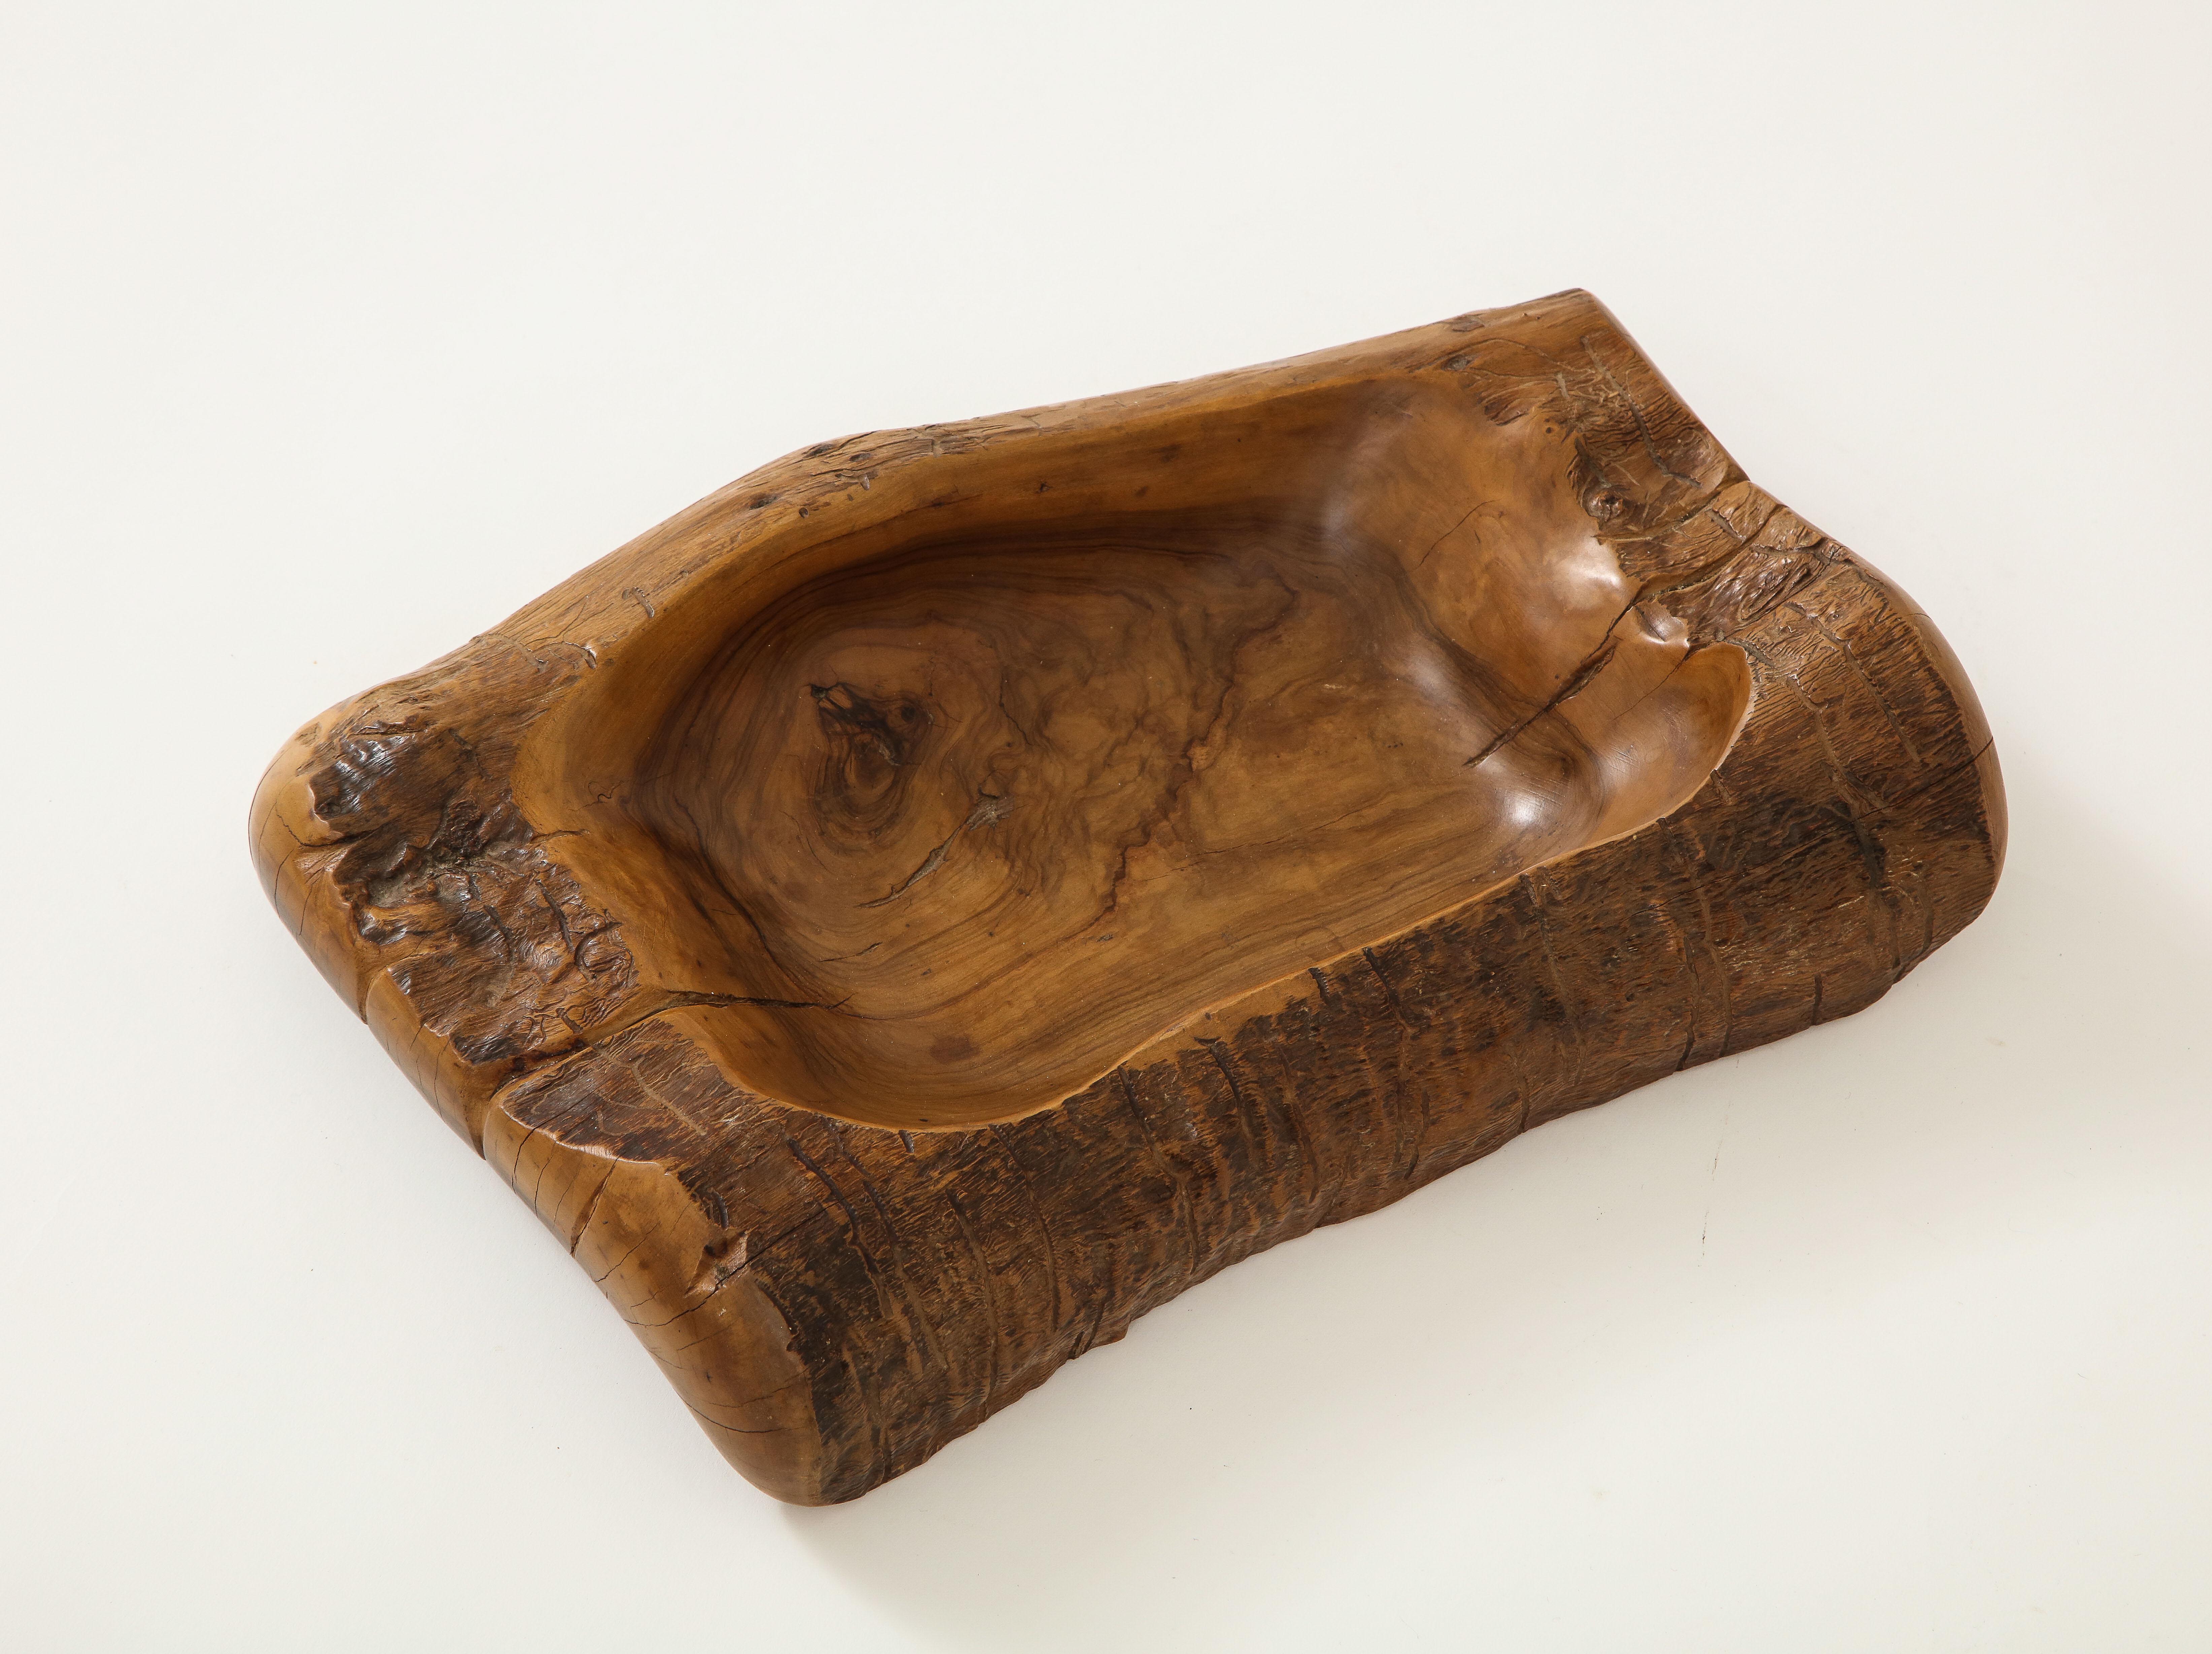 Classic Olivewood Videpoche by Alexandre Noll, France, c. 1950 (Signed) 

This object is a trademark example of Noll's exquisite artistry and powerful sensitivity to the medium of wood. The videpoche consists of a wonderfully sculpted border with